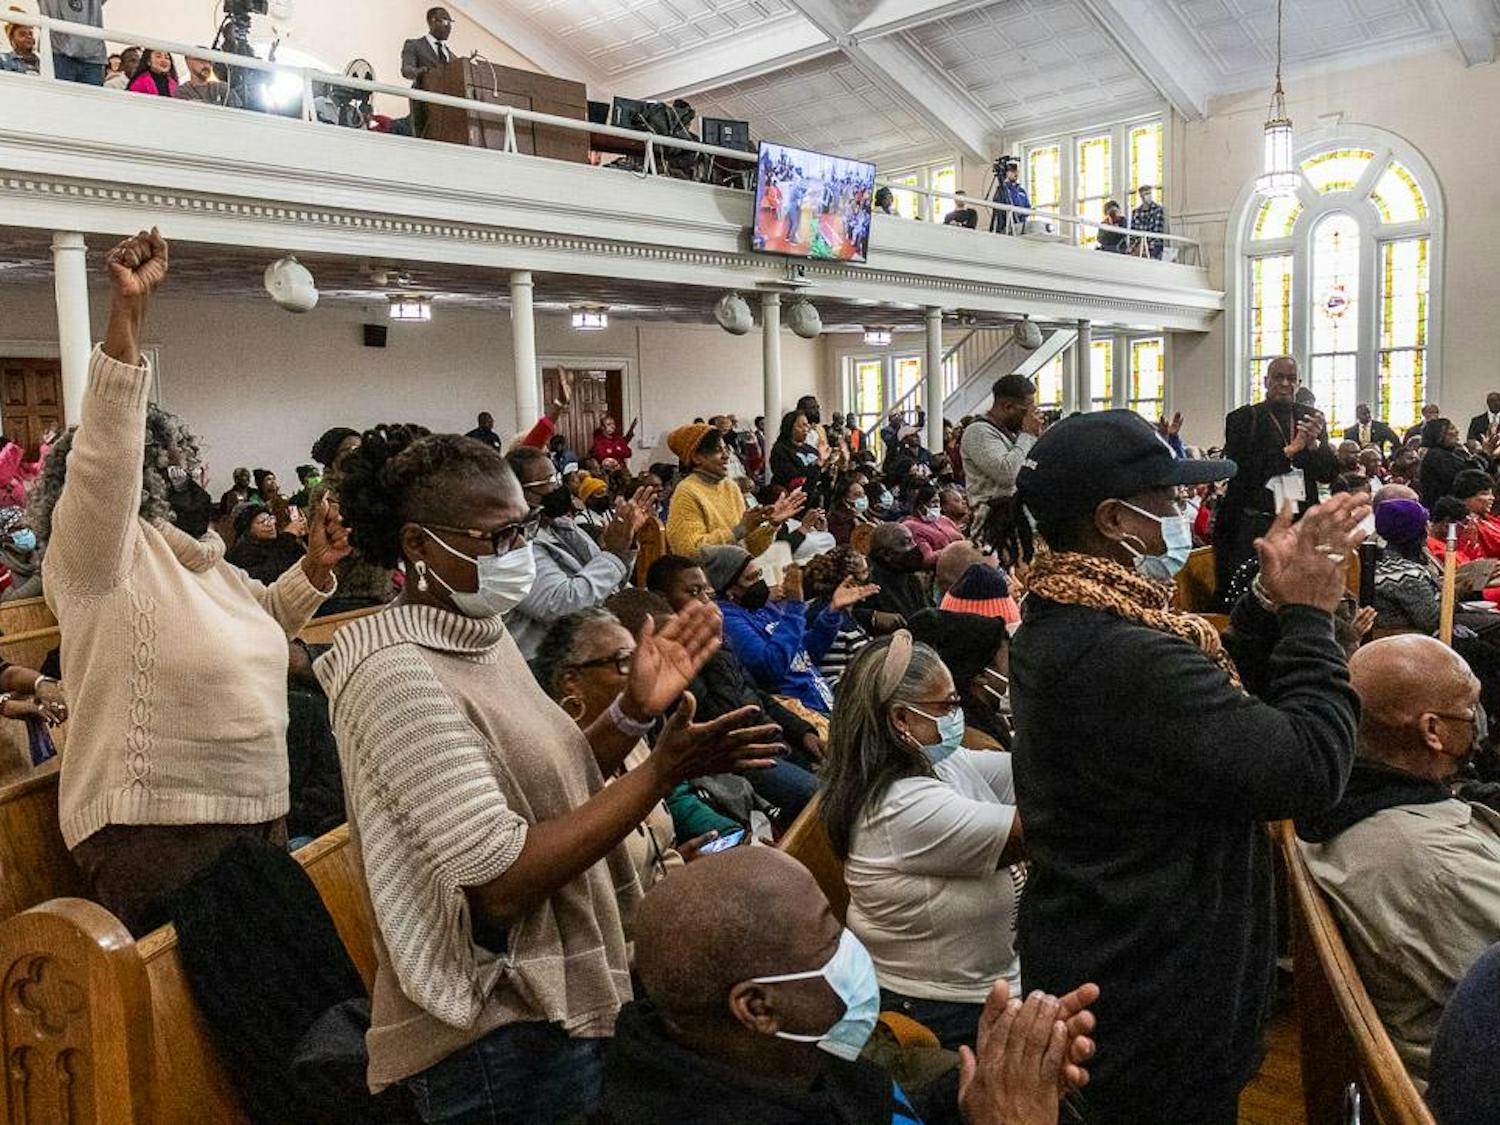 Audience members clap and cheer after U.S. House Democratic Leader Hakeem Jeffries finishes his keynote speech at the Martin Luther King Jr. Statewide Prayer Service at Zion Baptist Church on Jan. 15, 2024. The service featured speeches from religious and civil rights leaders from across South Carolina, discussing Dr. Martin Luther King Jr.’s legacy, civil rights and God’s role in overcoming racial inequality.